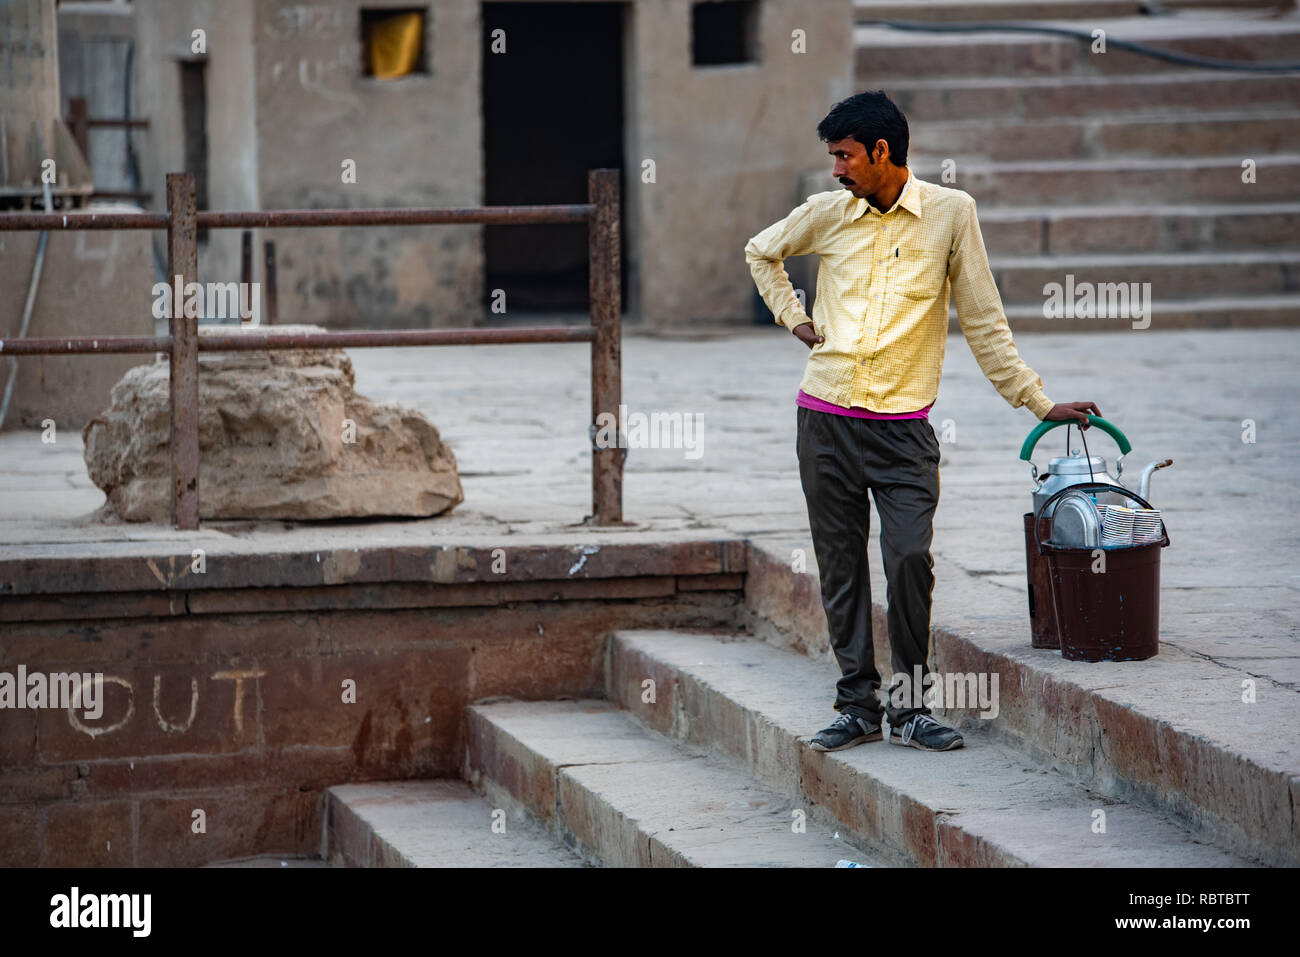 A Chaiwala or Tea-Seller standing on the Ghat in Varanasi looking at the river Ganges at the arriving boats to survey sales opportunities. Stock Photo